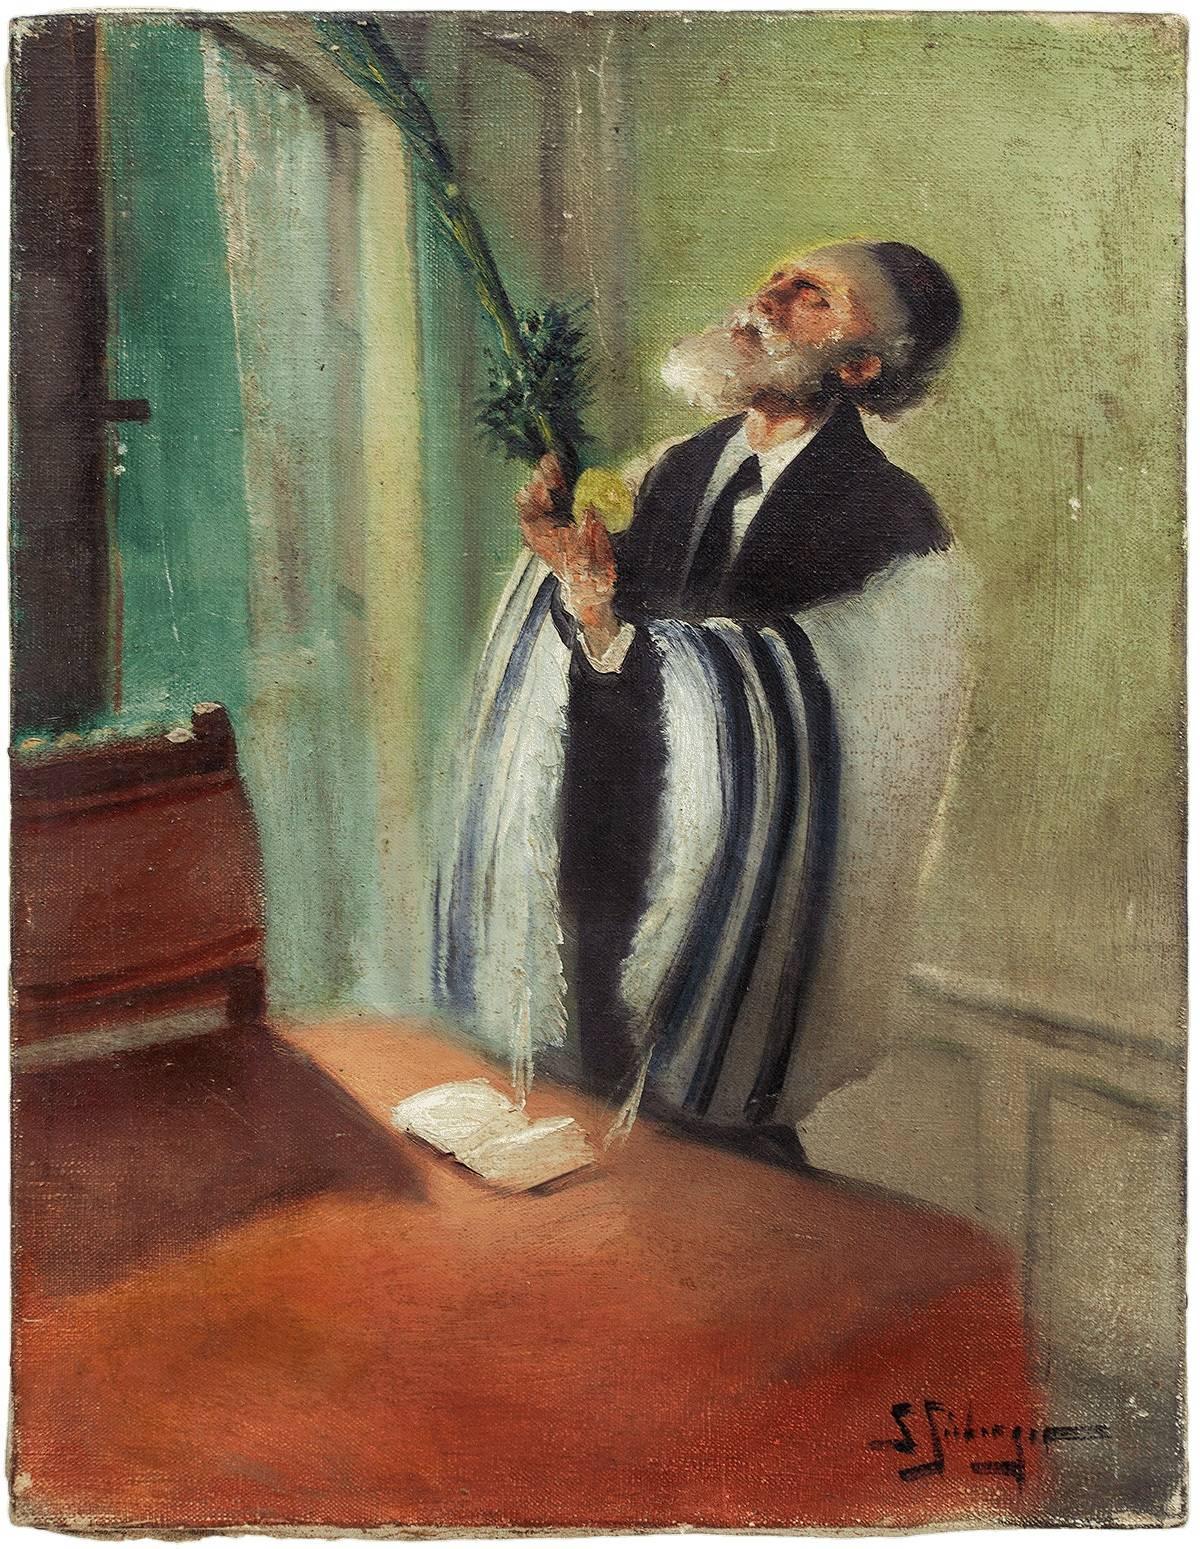 Samuel Seeberger Figurative Painting - Lulav and Etrog Benediction, Judaica Oil Painting, Early 20th Century